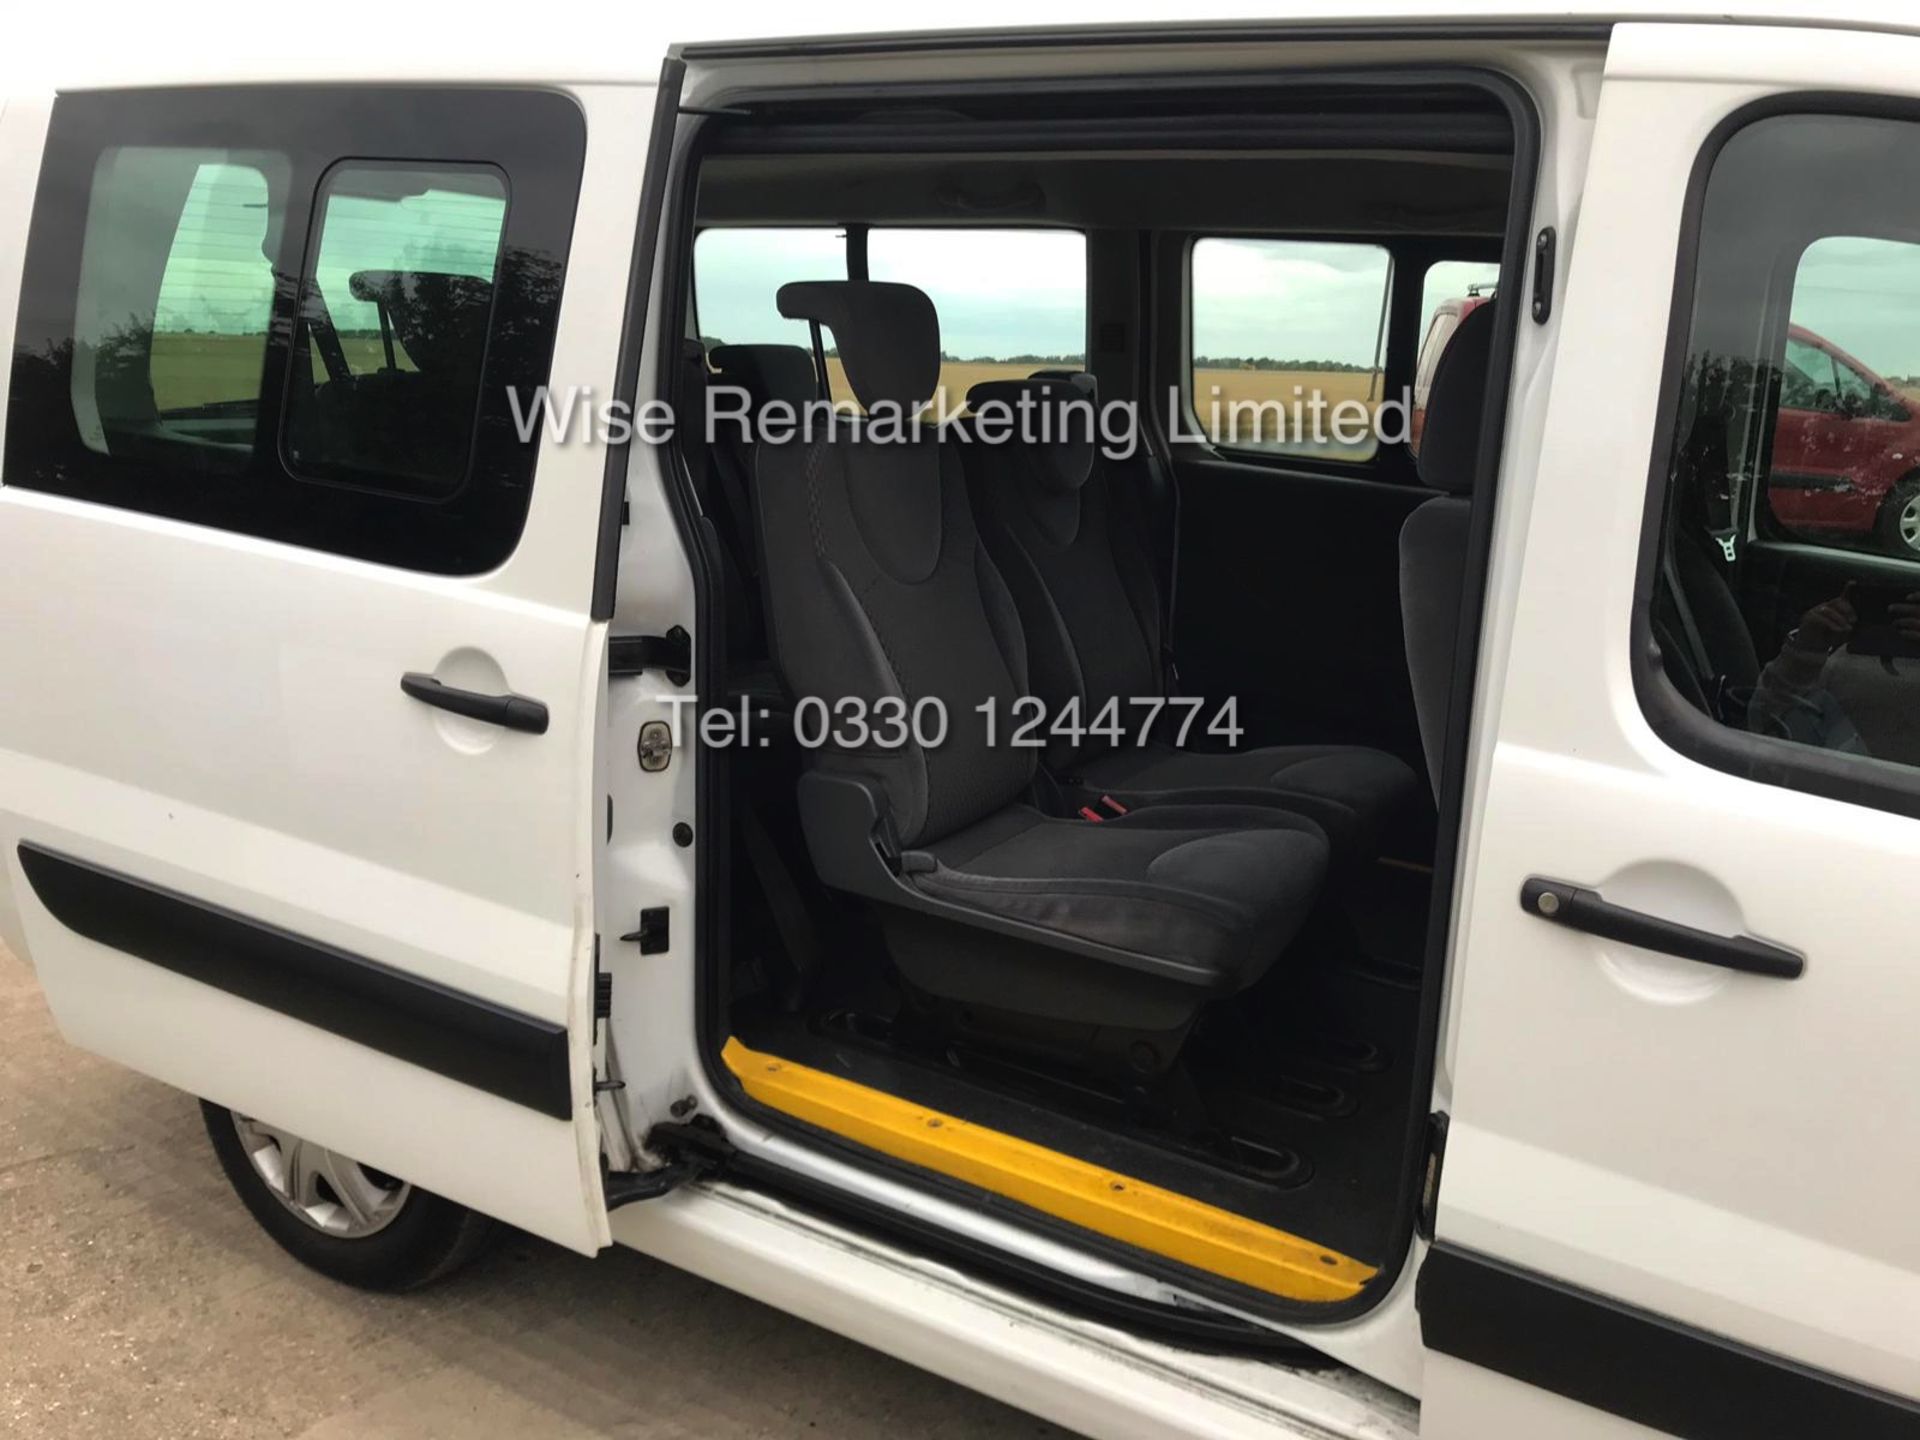 PEUGEOT EUROBUS S *MPV 8 SEATER* 2.0l (2013 - 13 REG) **AIR CON** - 1 OWNER FROM NEW - Image 10 of 19